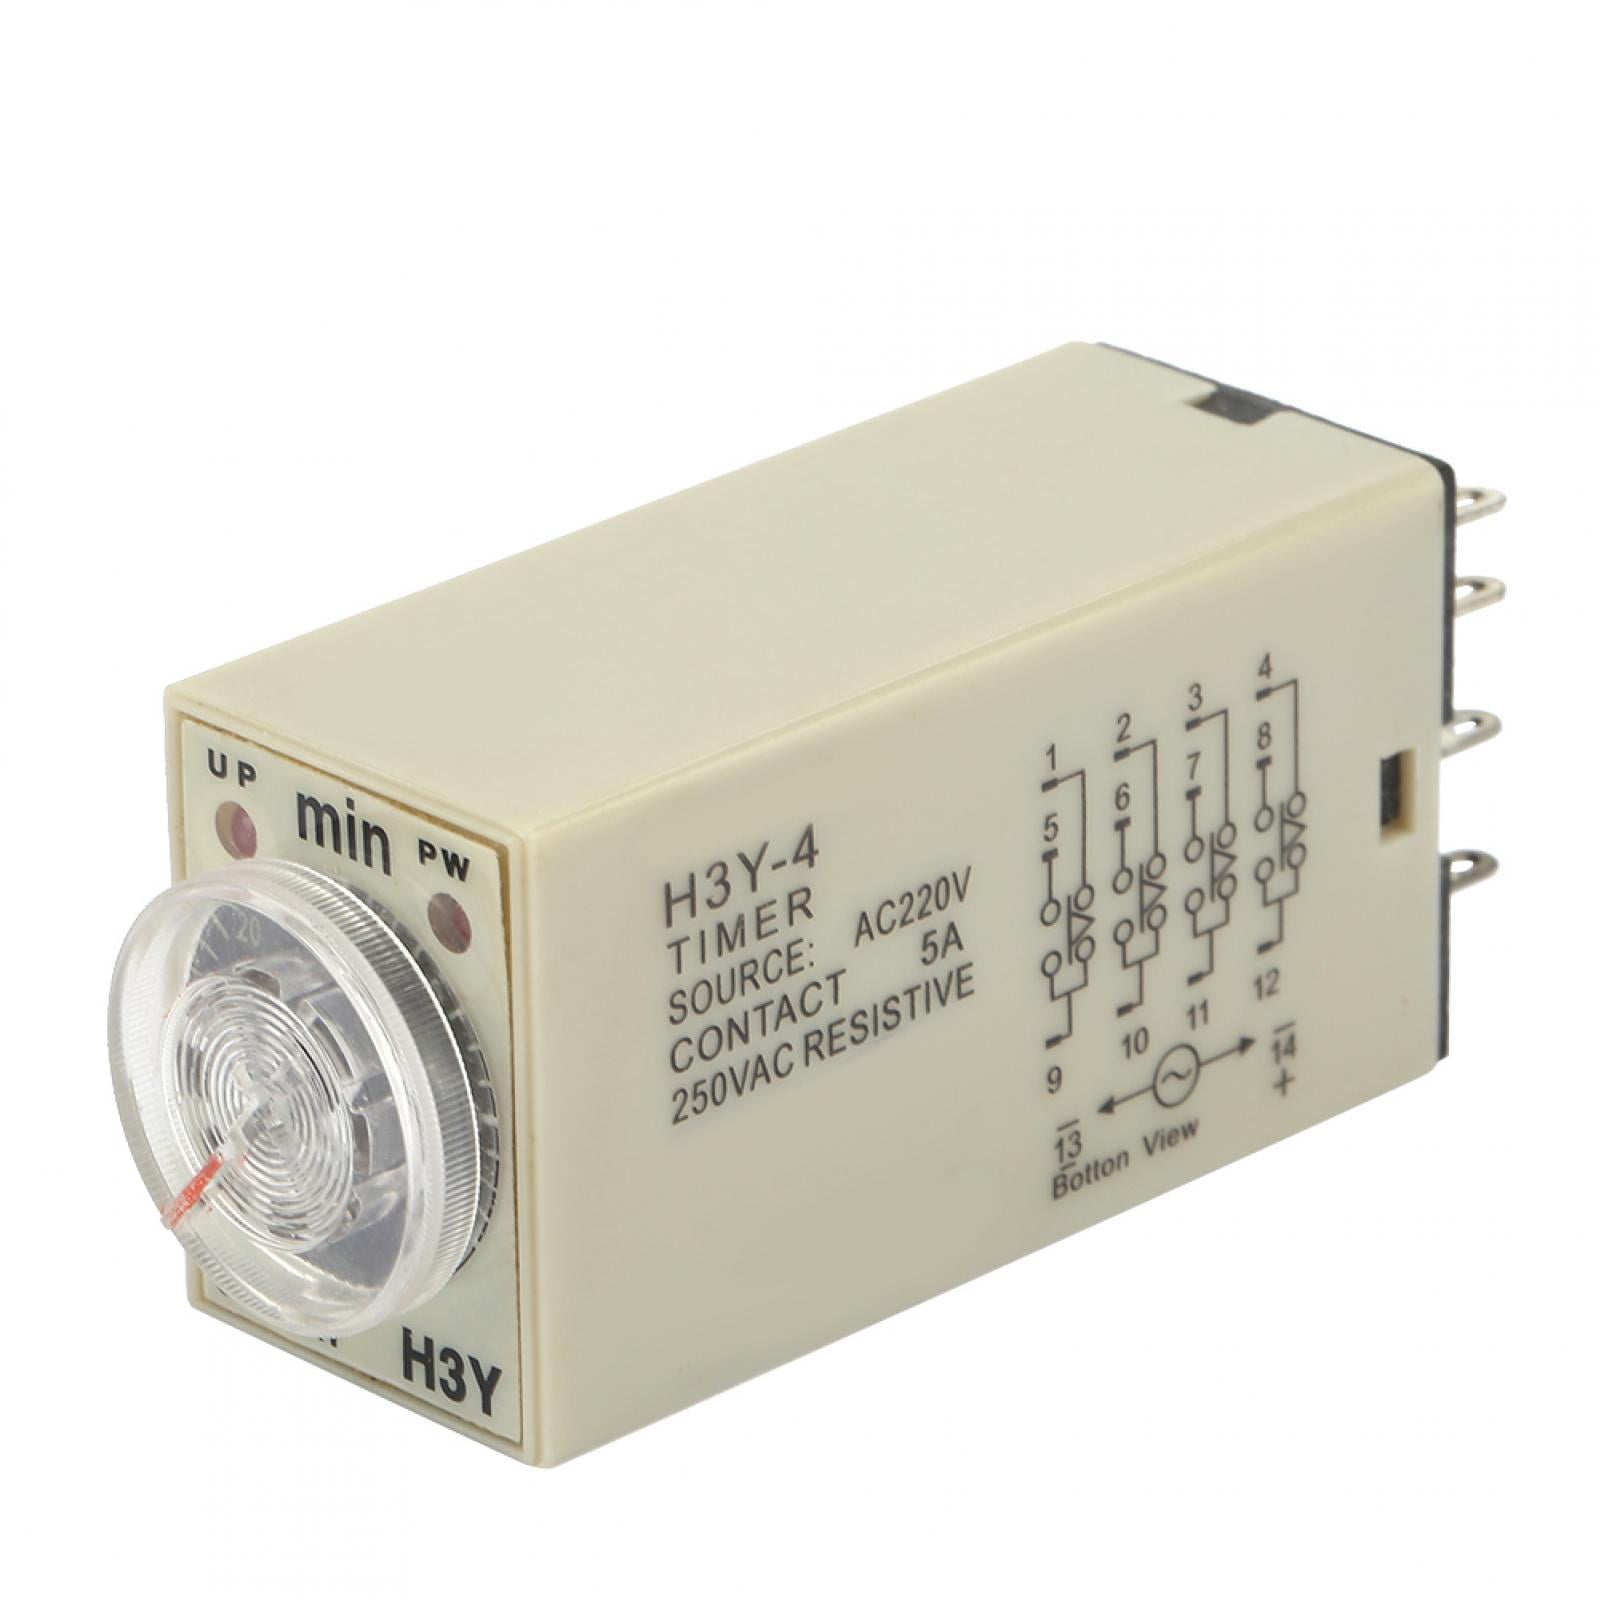 AC 220V Delay Timer Time Relay 0~60 Minute AH3-3 & Base 